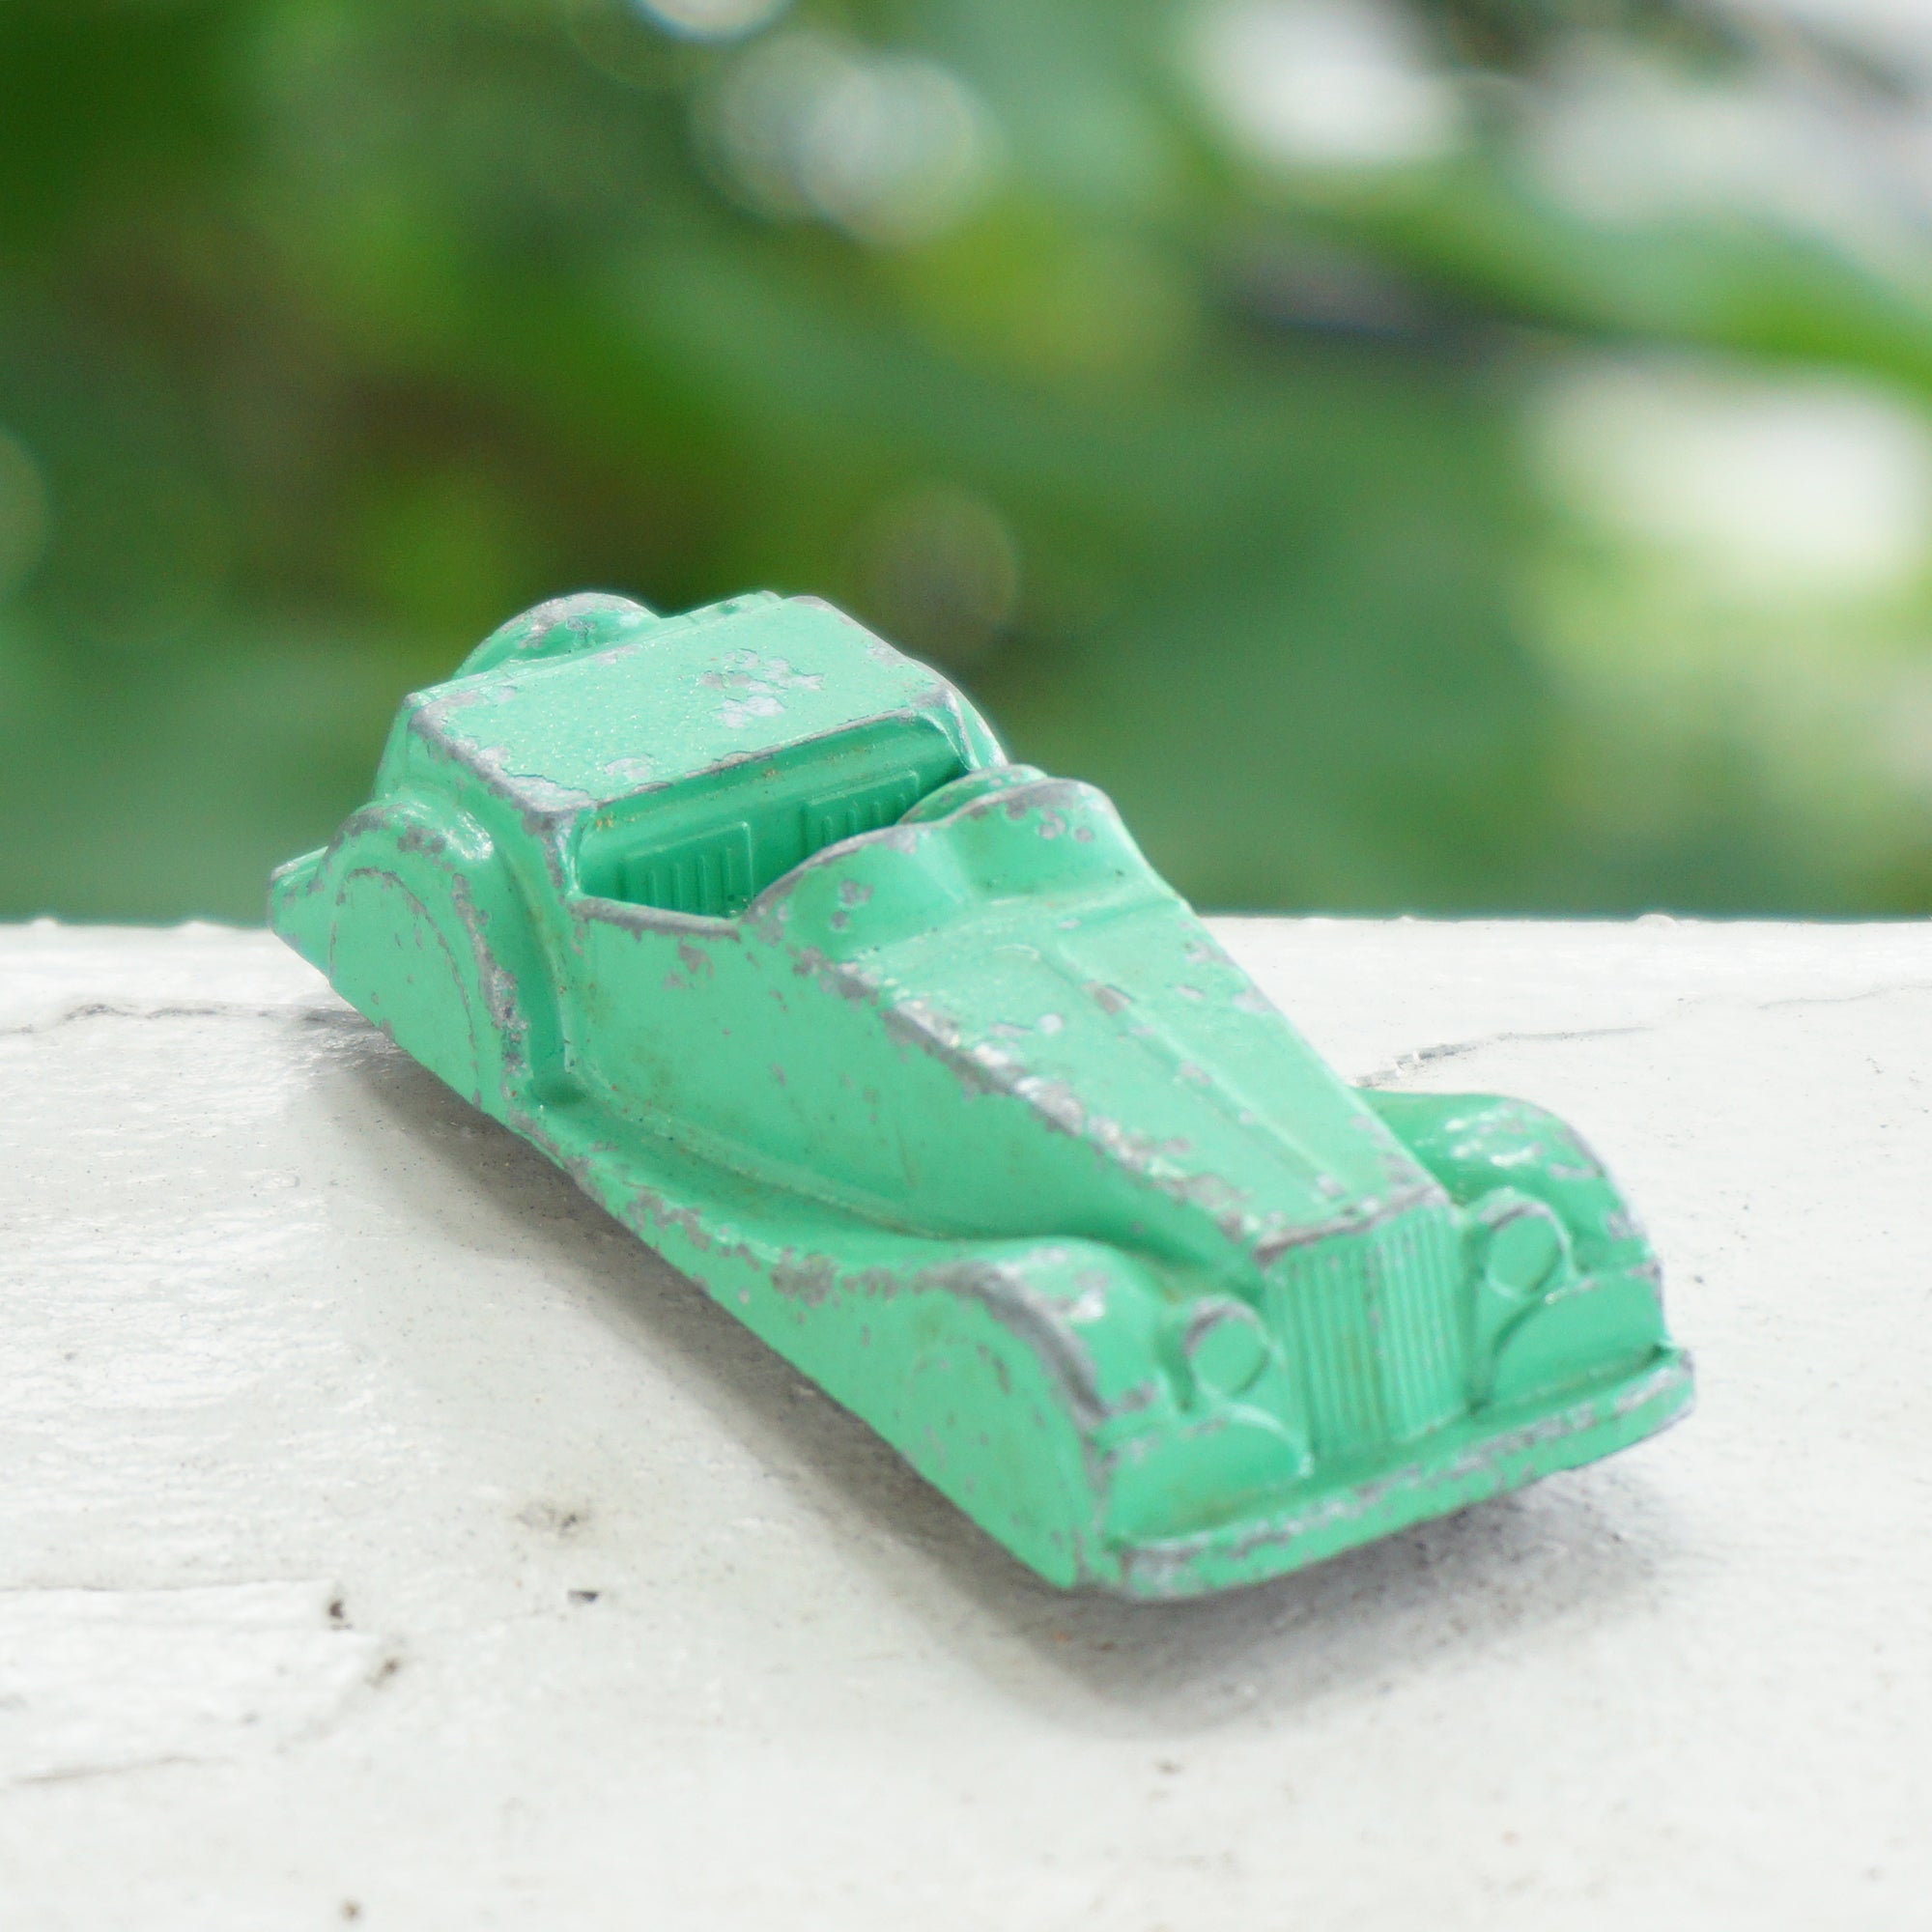 Vintage Diecast MIDGETOY Mint Green Old Toy Car. Made in Rockford, ILL, U.S.A.